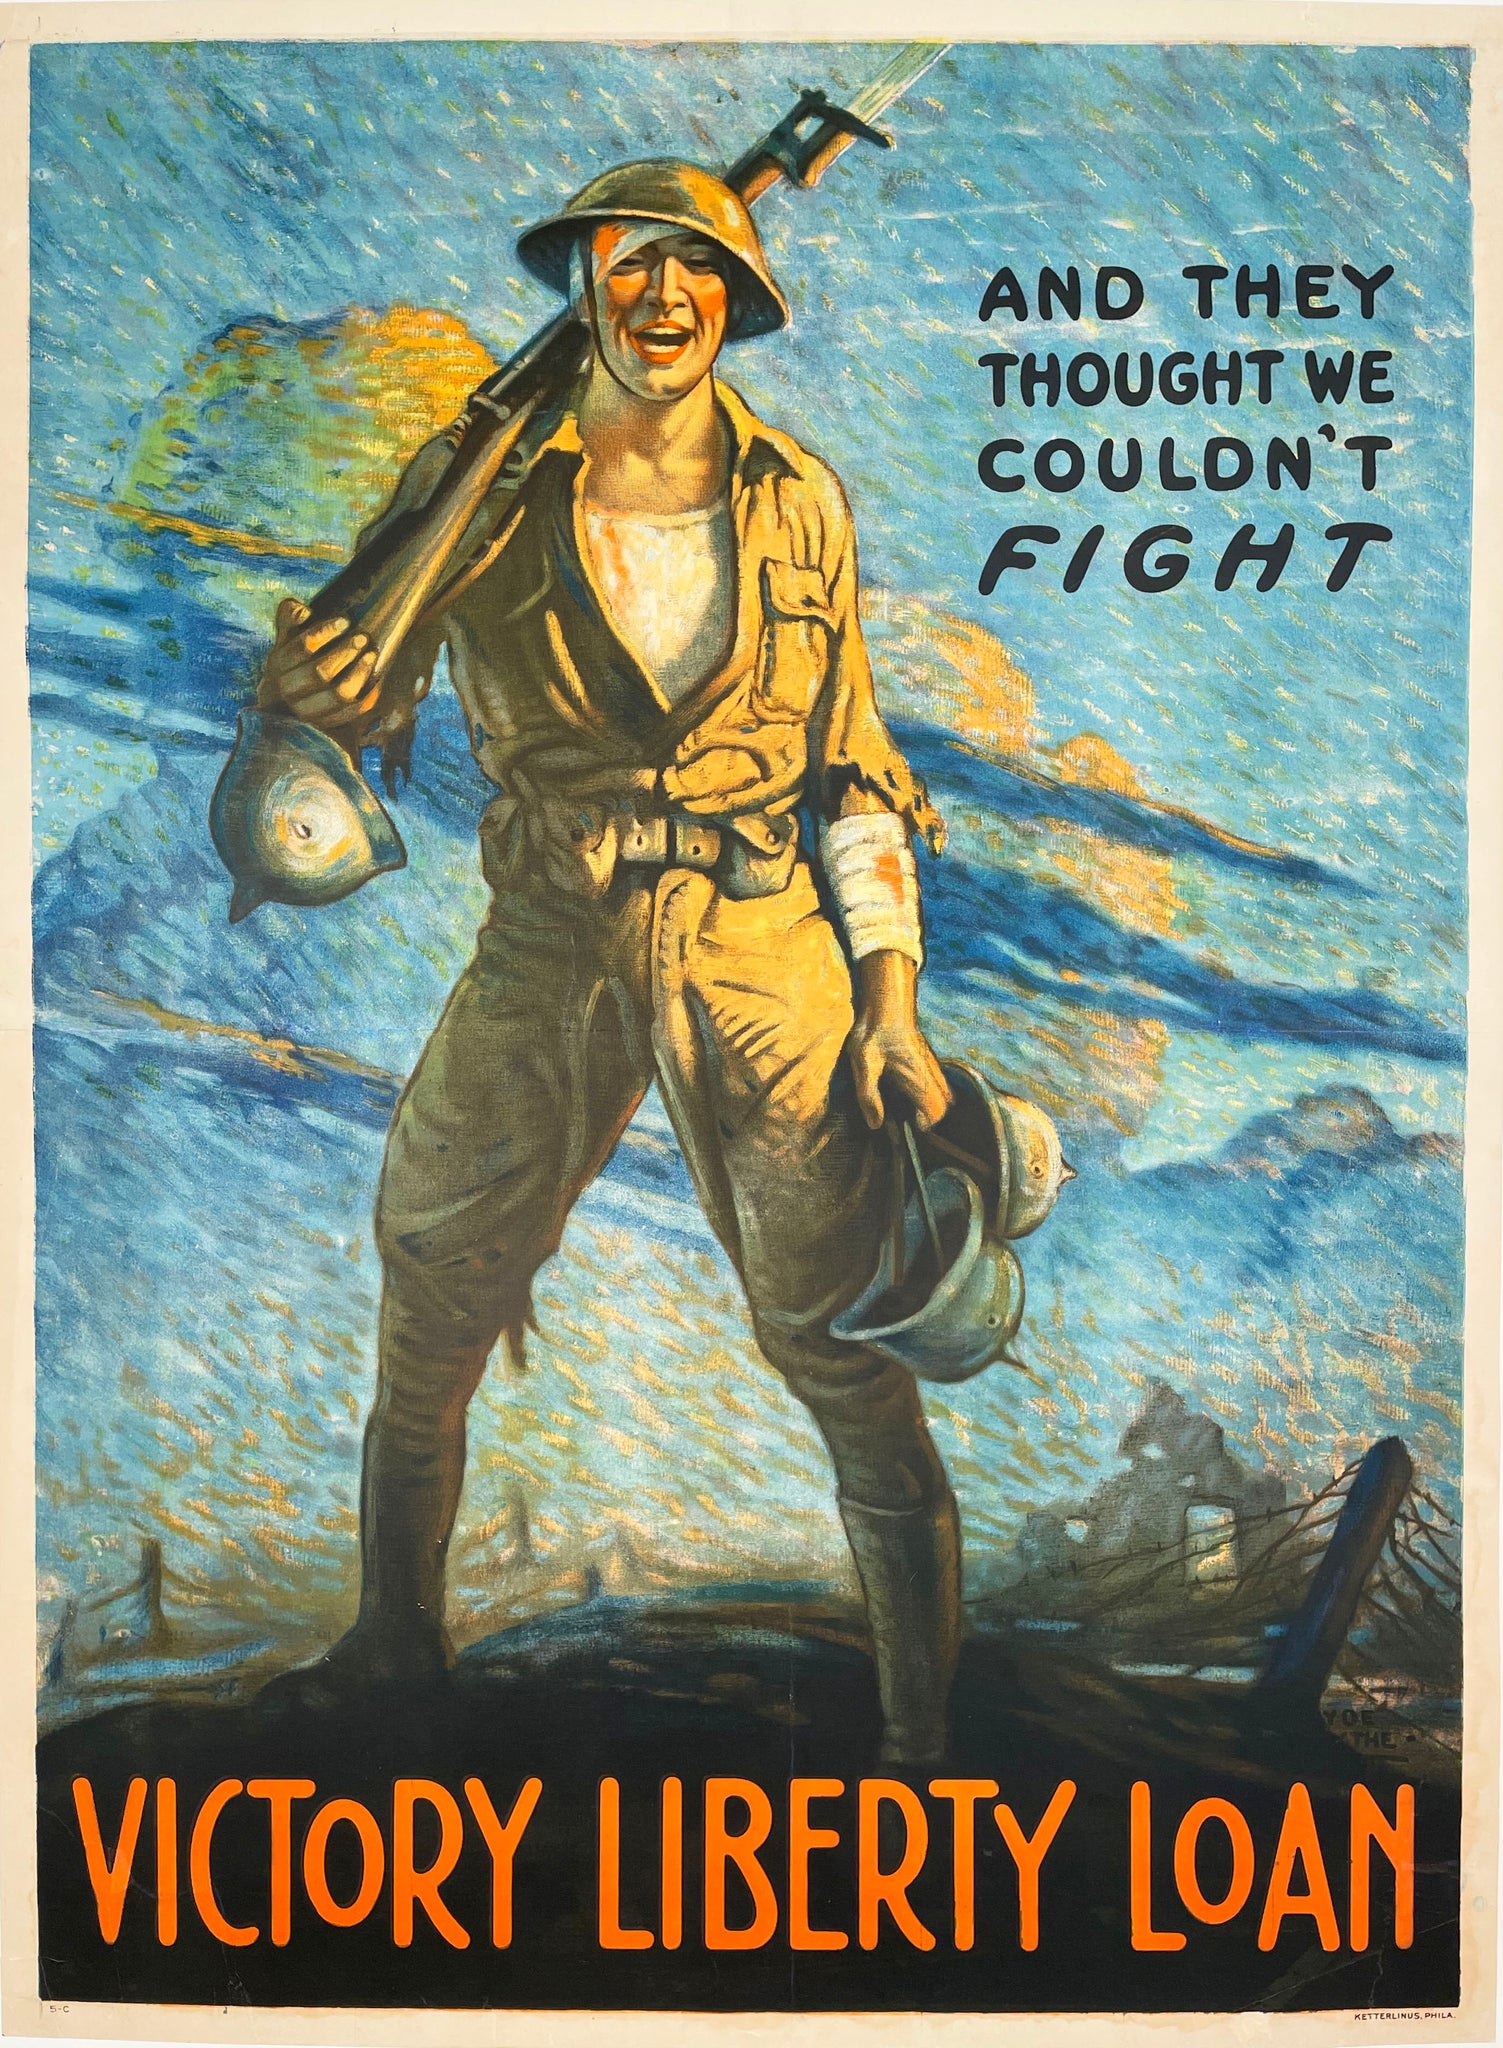 Victory Liberty Loan - Vintage WWI poster 1918